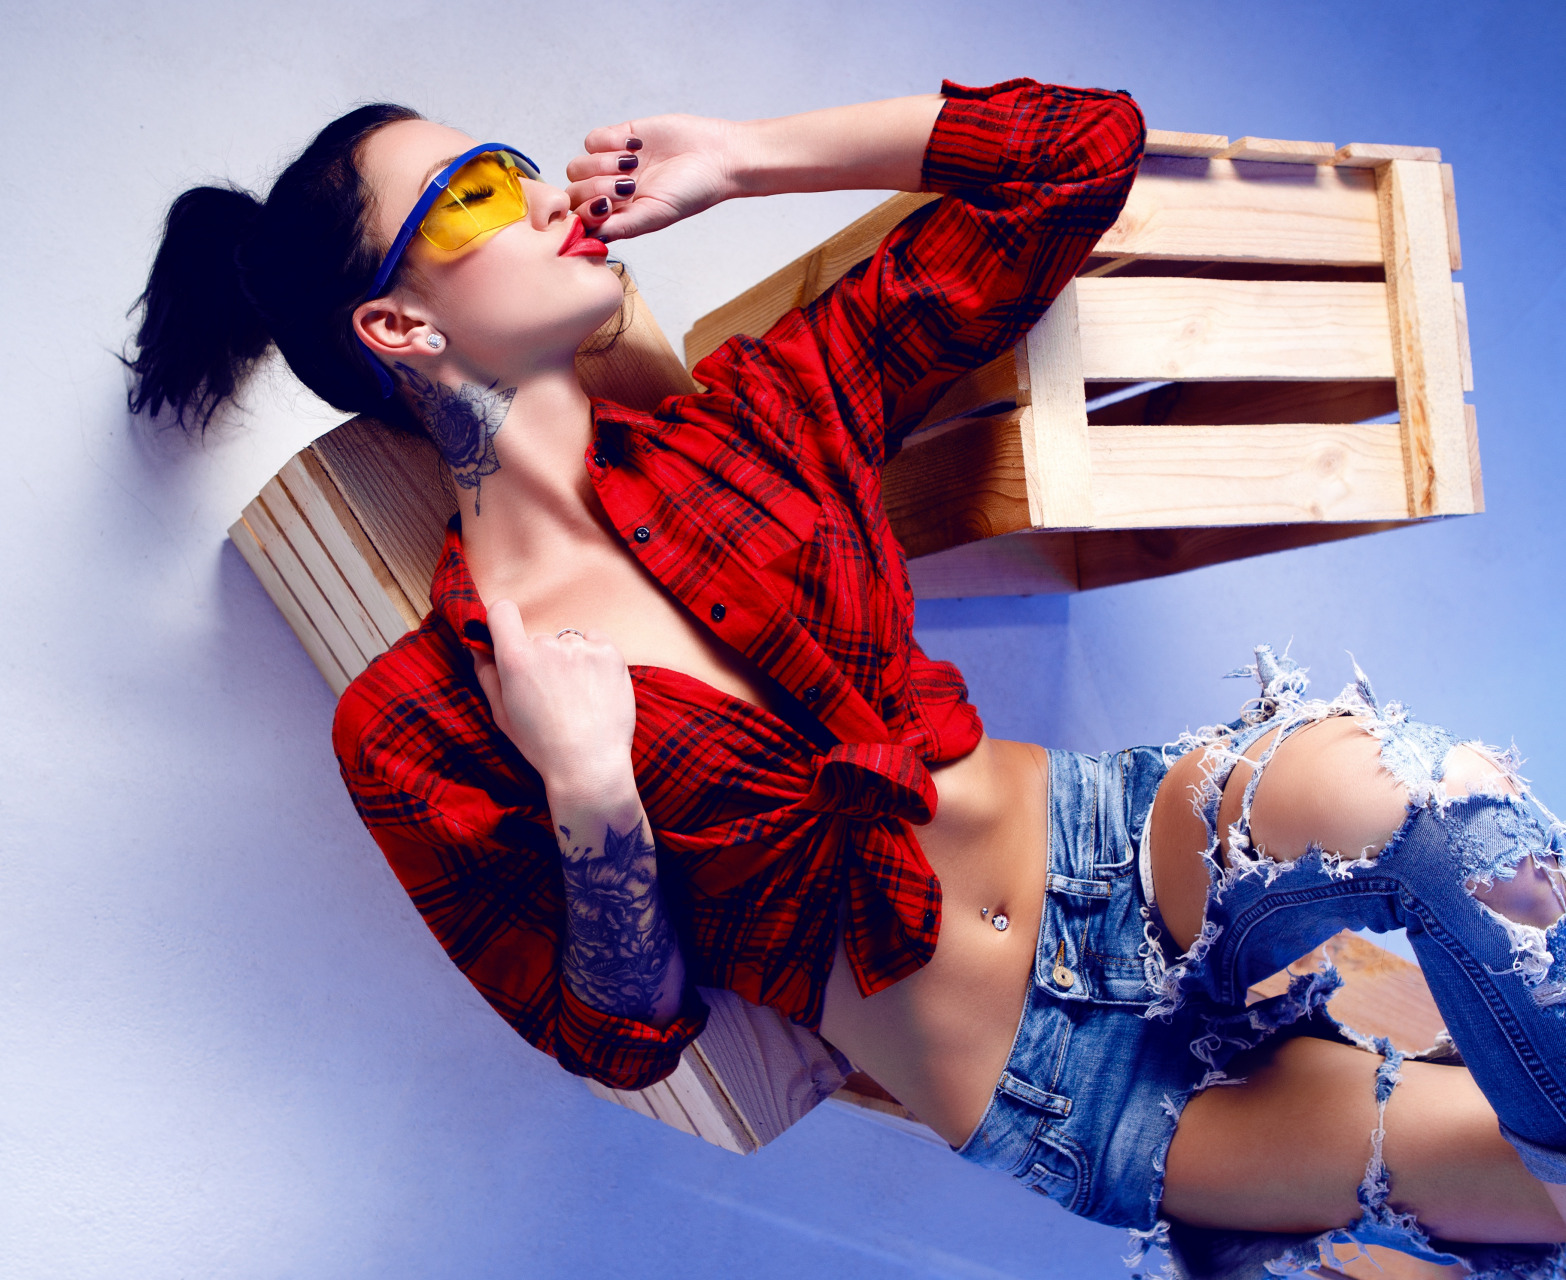 People 1566x1280 bare midriff torn jeans red shirt tattoo sleeve pierced navel thighs lying on back dark hair belly button closed eyes legs crossed lying down caressing glasses hairbun blue background belly model tattoo women open shirt